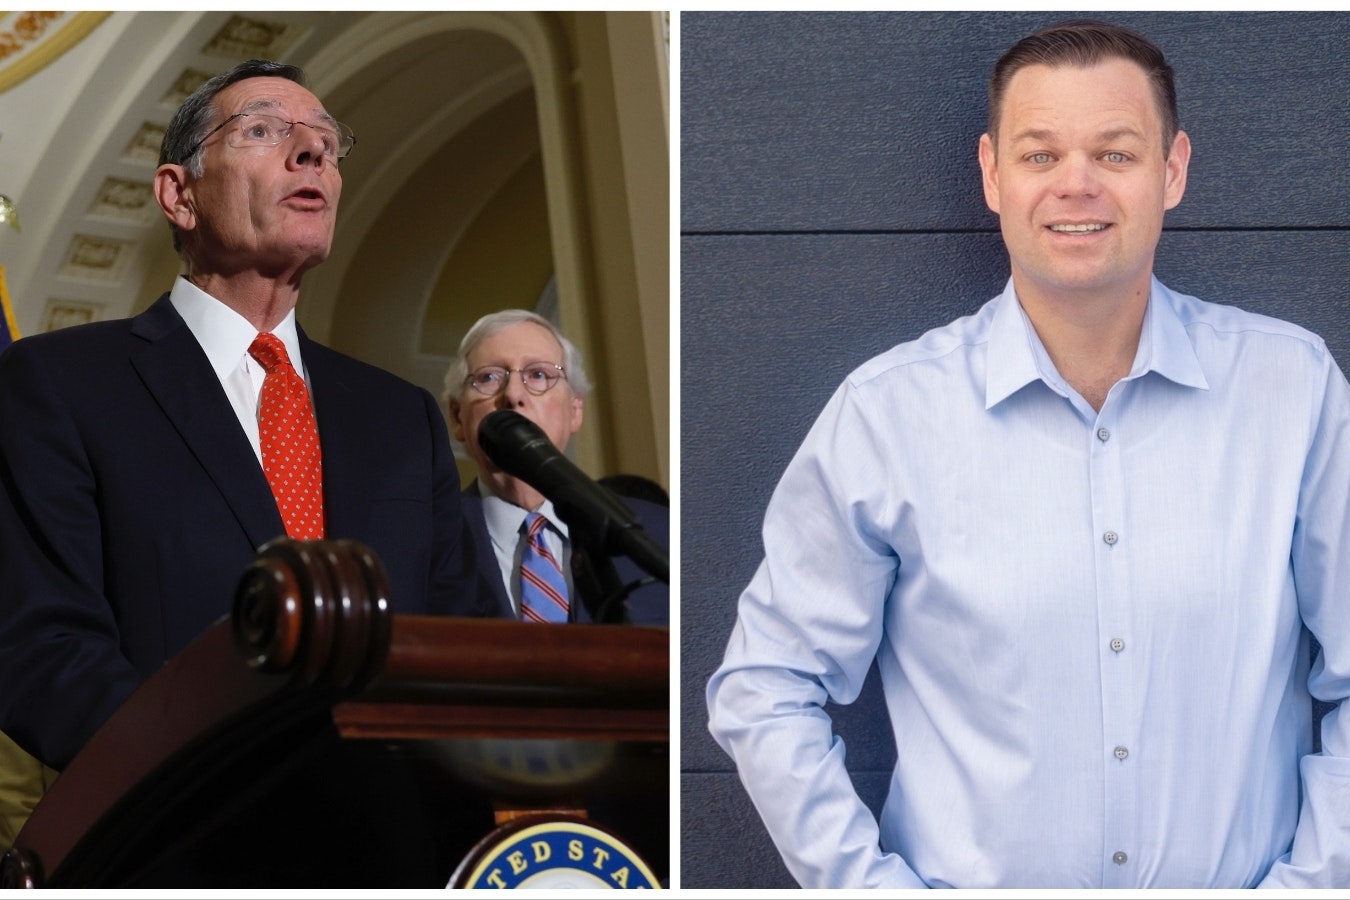 Sen. John Barrasso, left, and Reid Radner, who announced Tuesday he's challenging Barrasso for his seat in 2024.